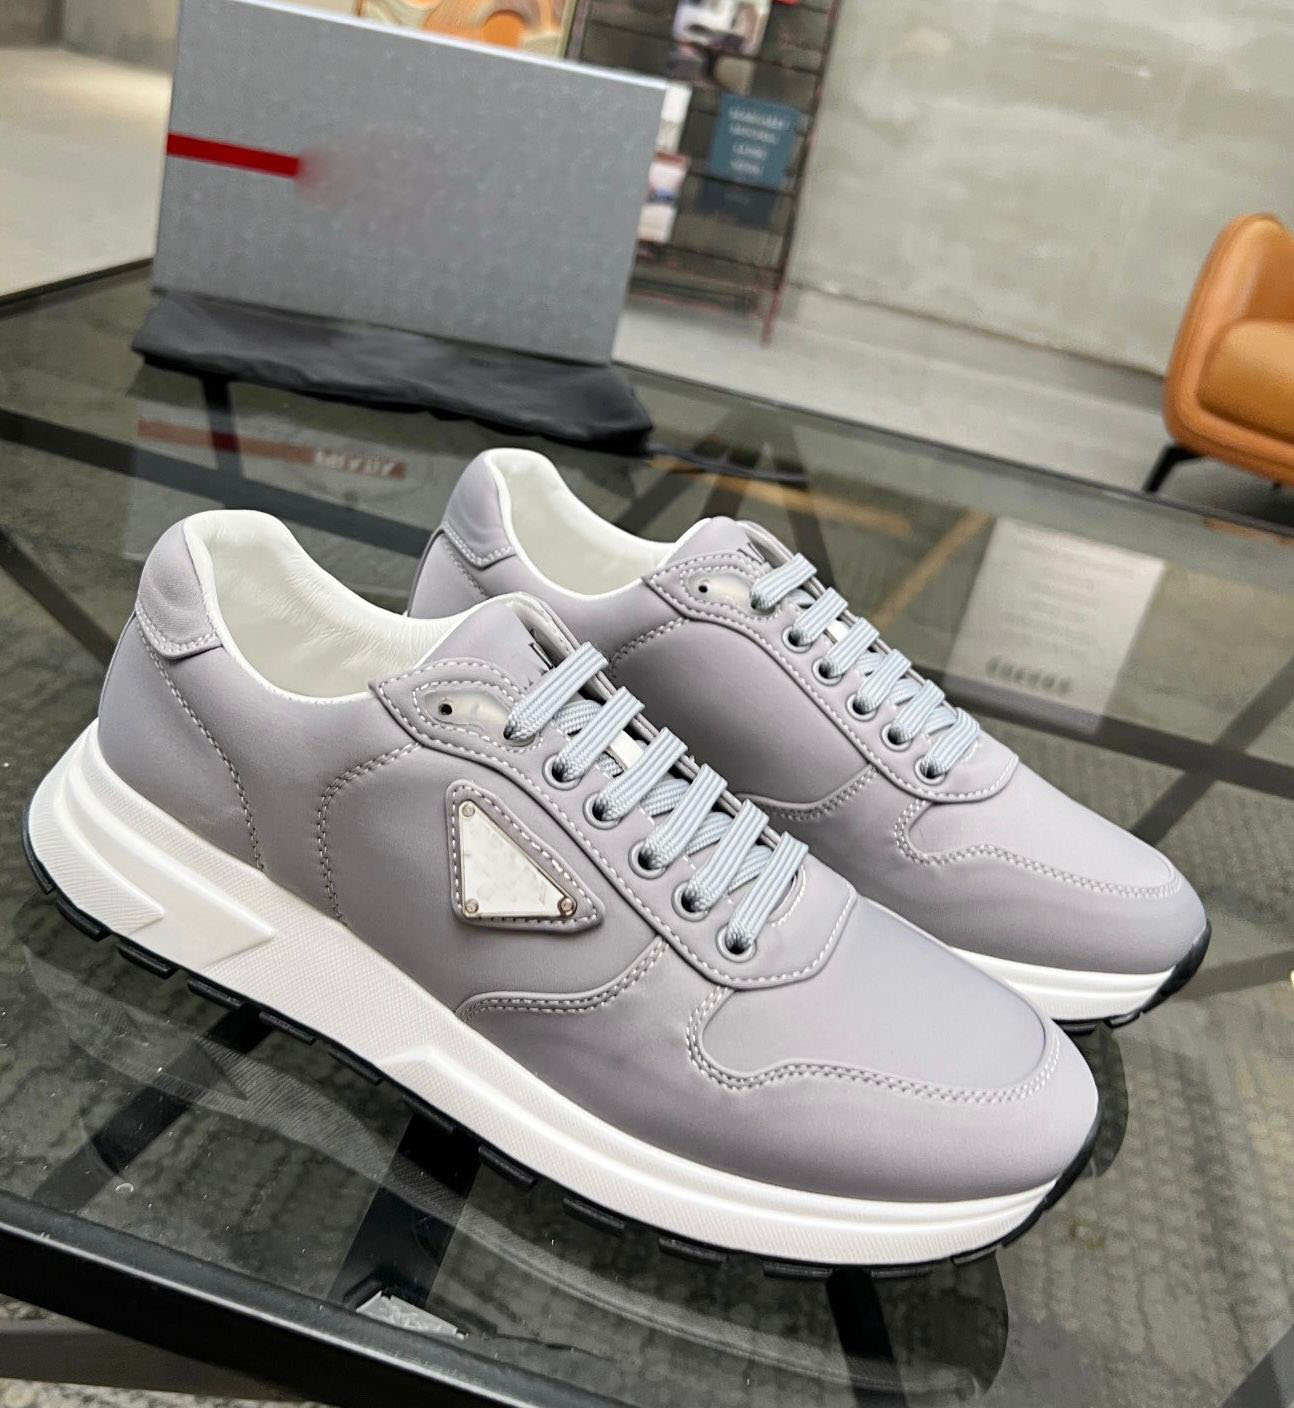 Top Brand 2024 Men Prax 01 Runner Sports Shoes Brush Leather Sneakers Ivory Black Grey Light Rubber Sole Trainers Super Quality Daily Skateboard Walking